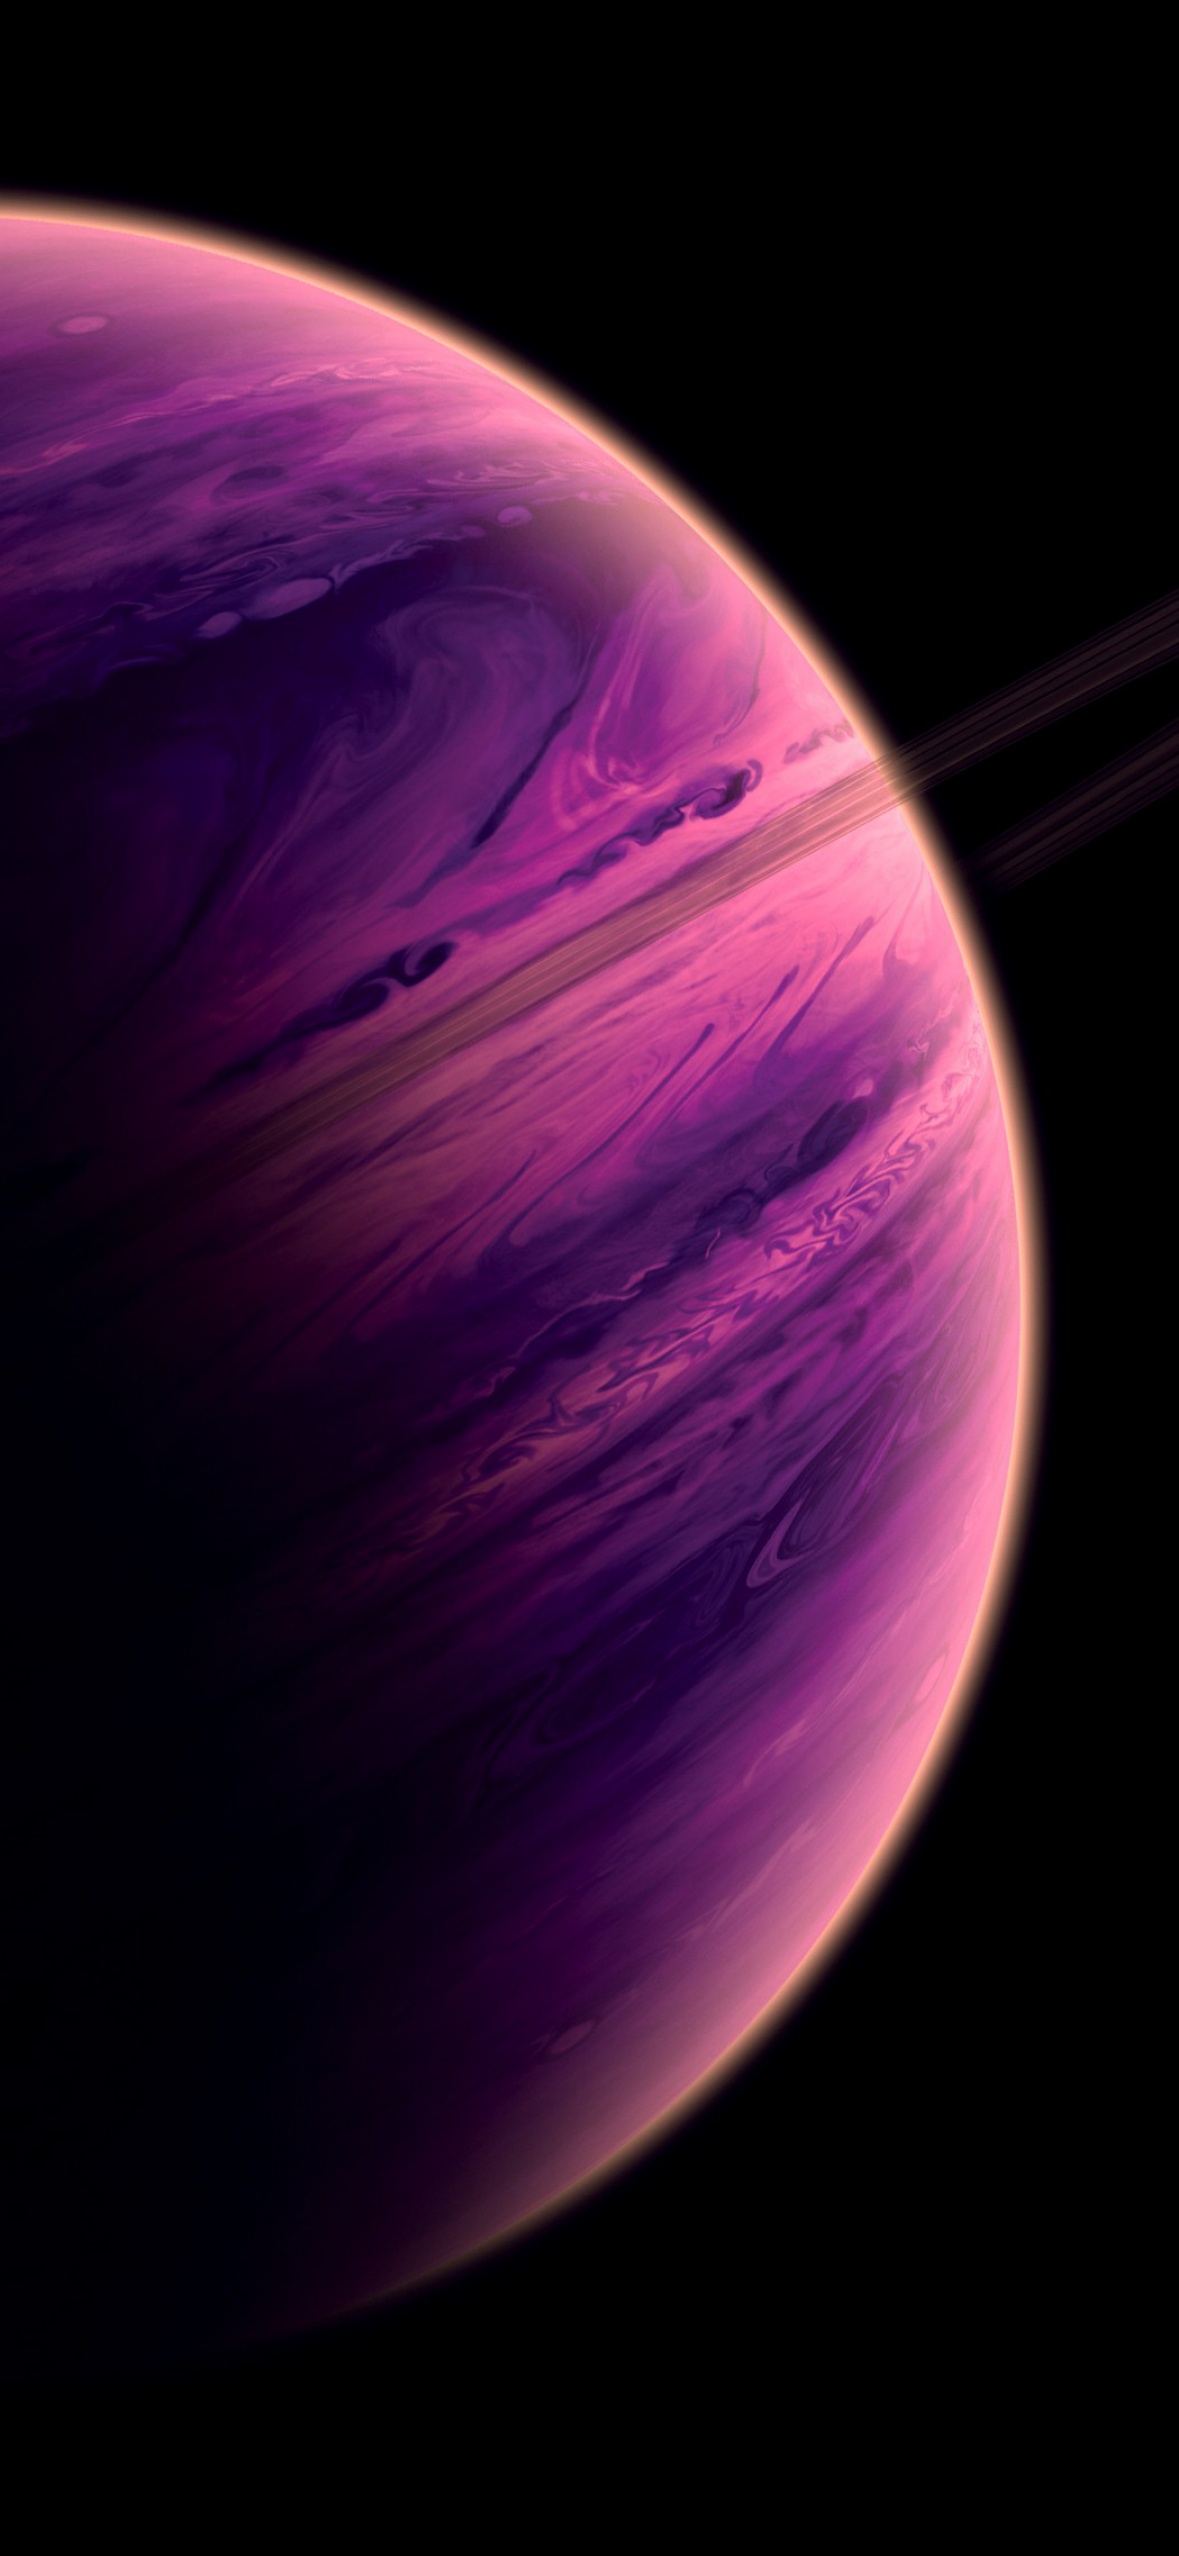 Galaxy planet Wallpapers Download | MobCup